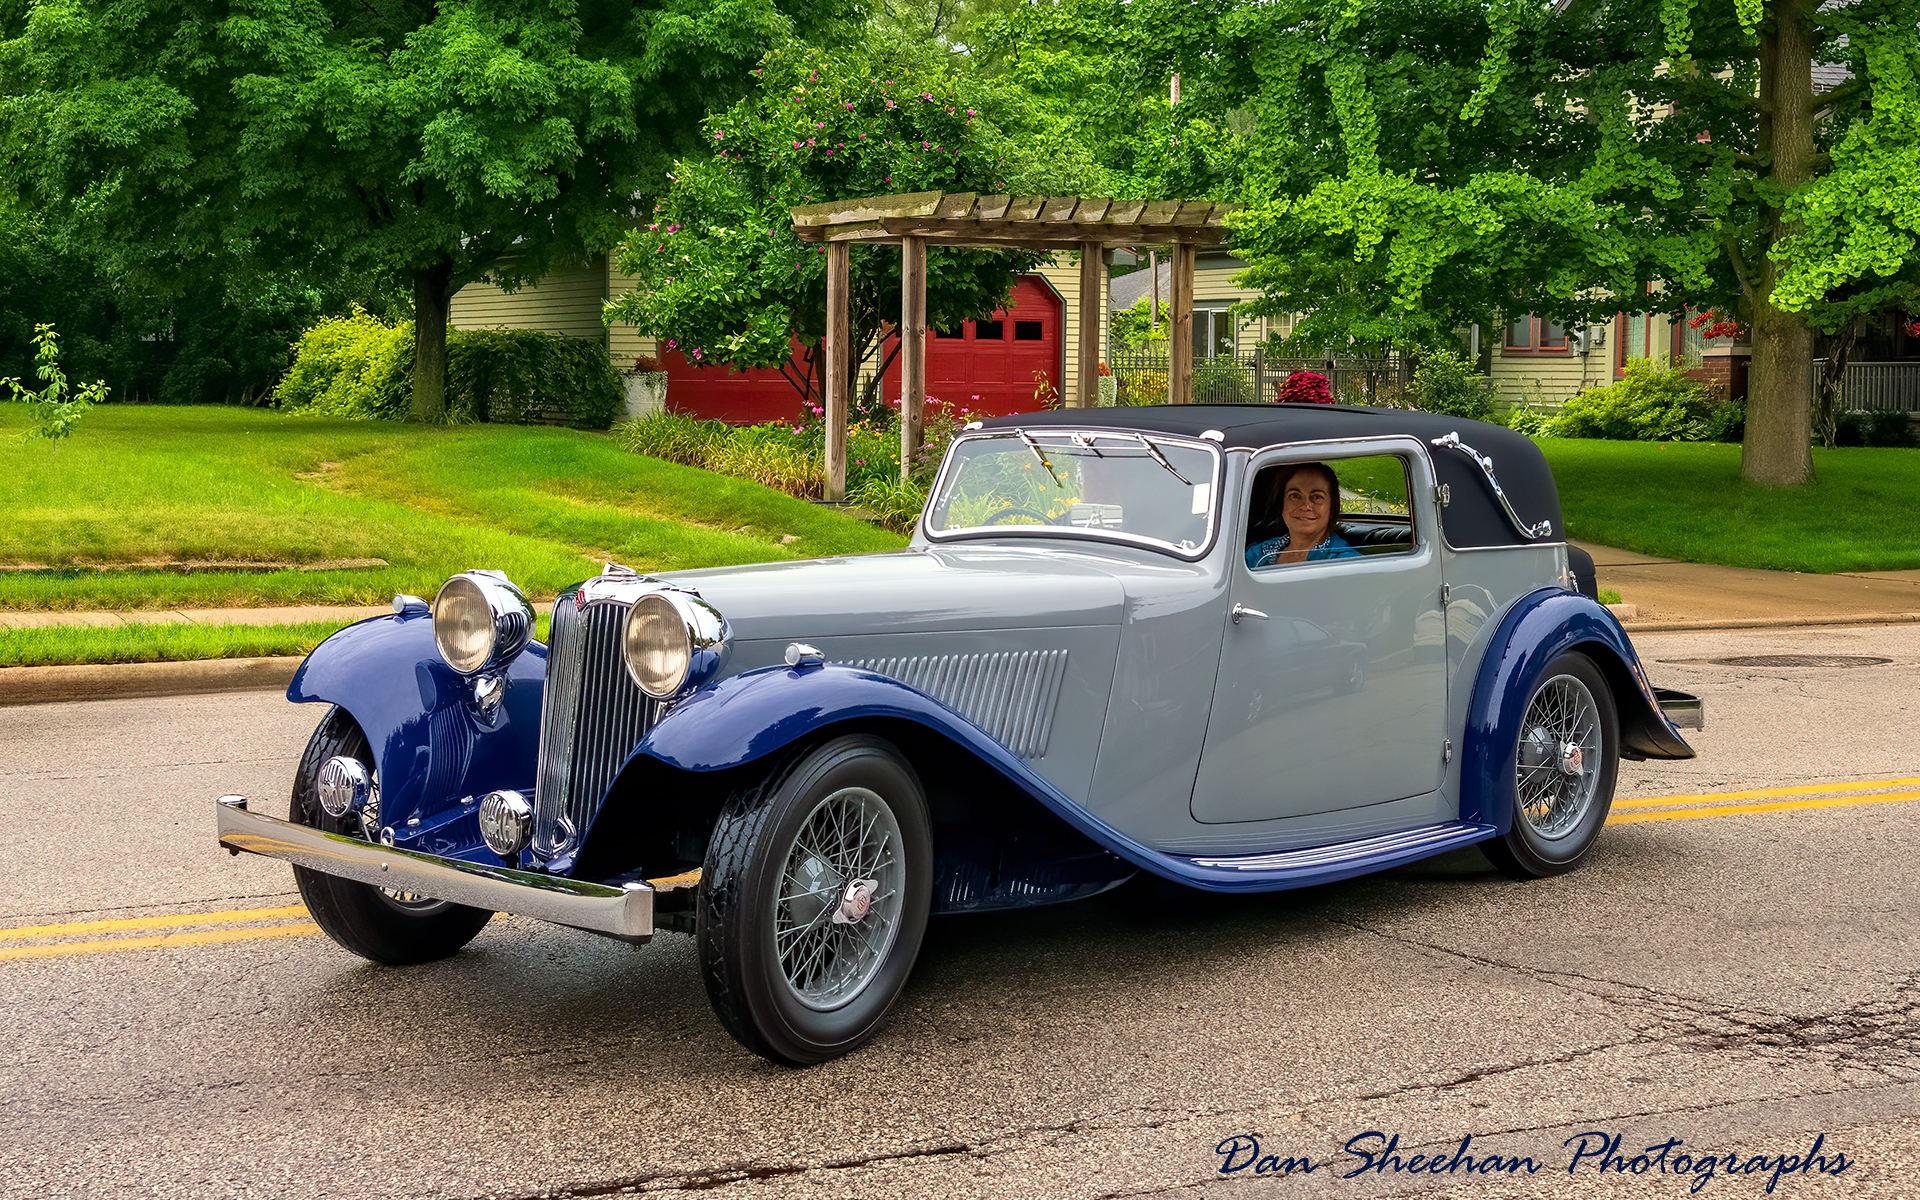 This 1935 Swallow is the very definition of automotive art. Dan Sheehan Photographs. Apex ... And Beyond.com : Cars : Dan Sheehan Photographs - Fine Art Stock Photography